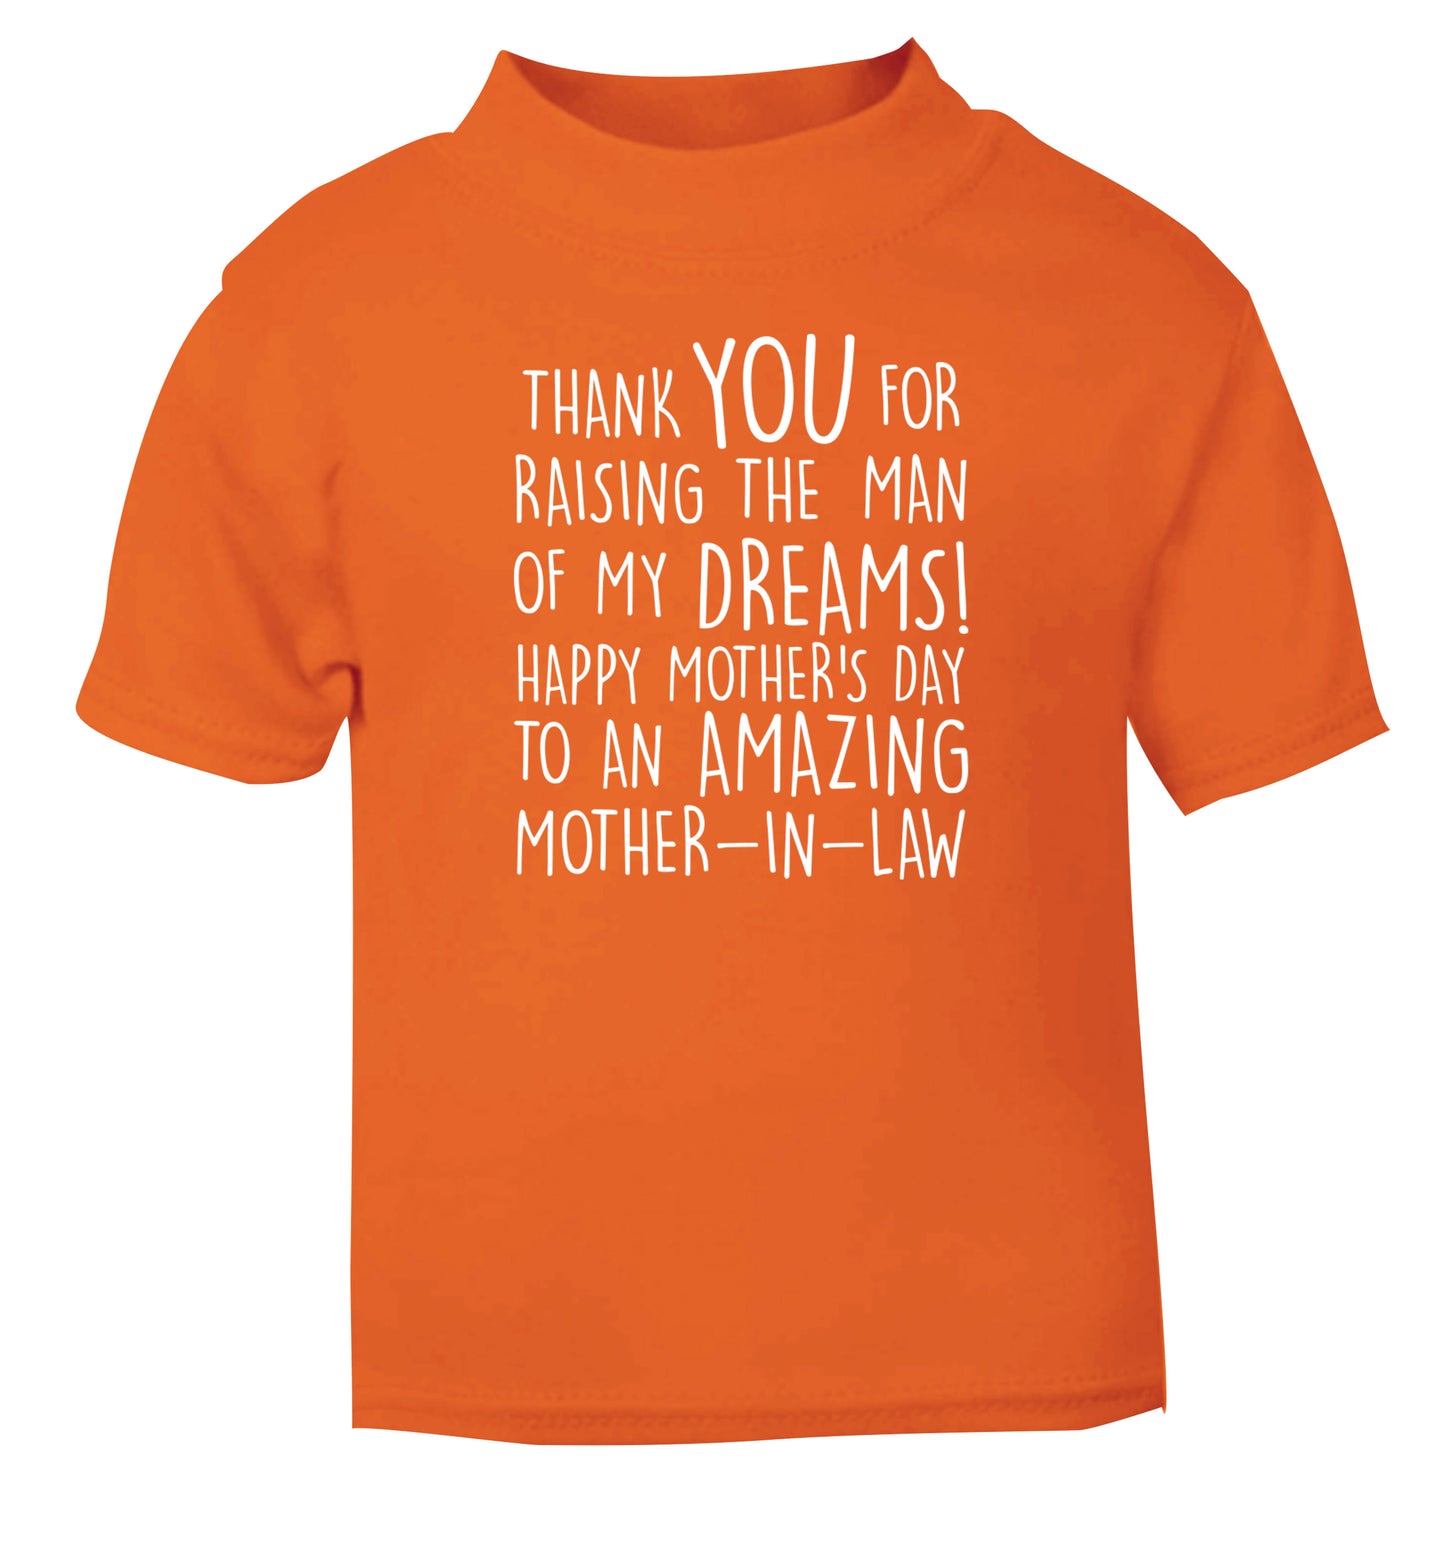 Thank you for raising the man of my dreams happy mother's day mother-in-law orange Baby Toddler Tshirt 2 Years